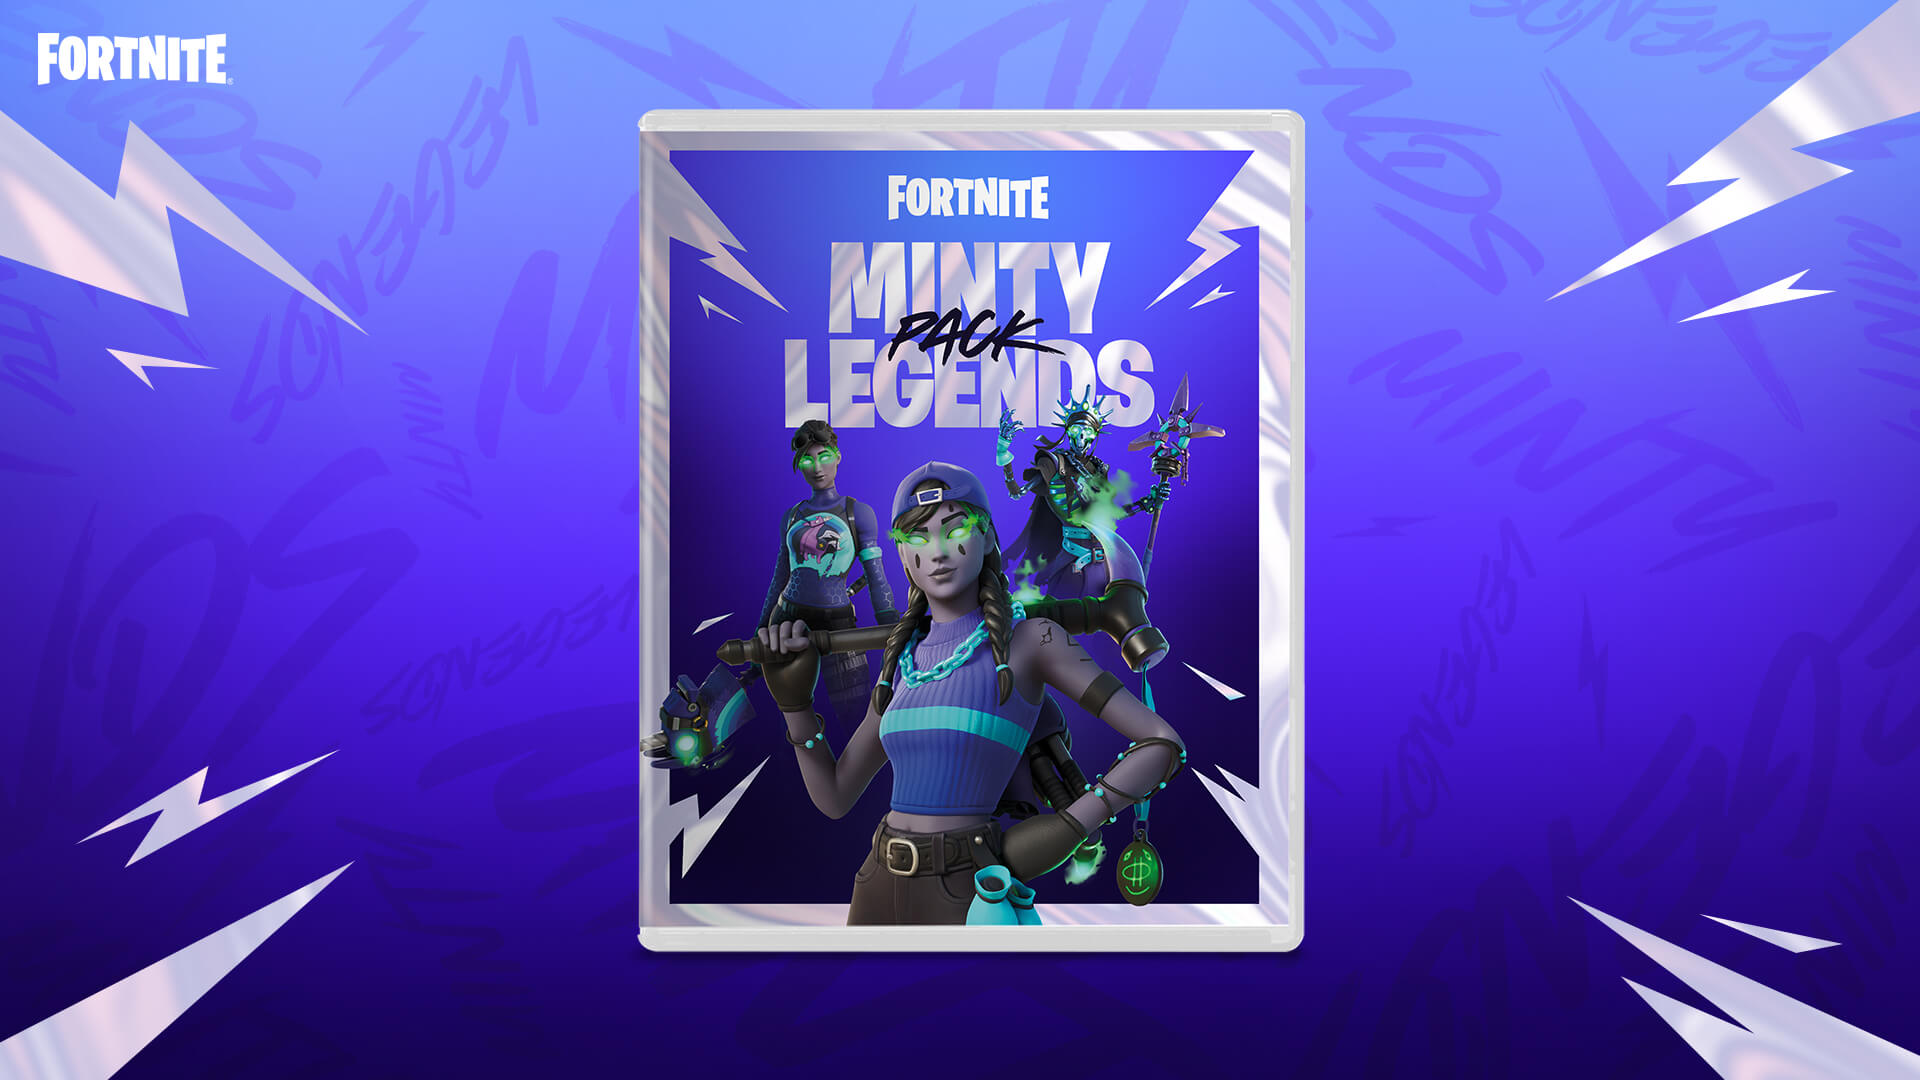 Fortnite Reveals The New Minty Legends Pack